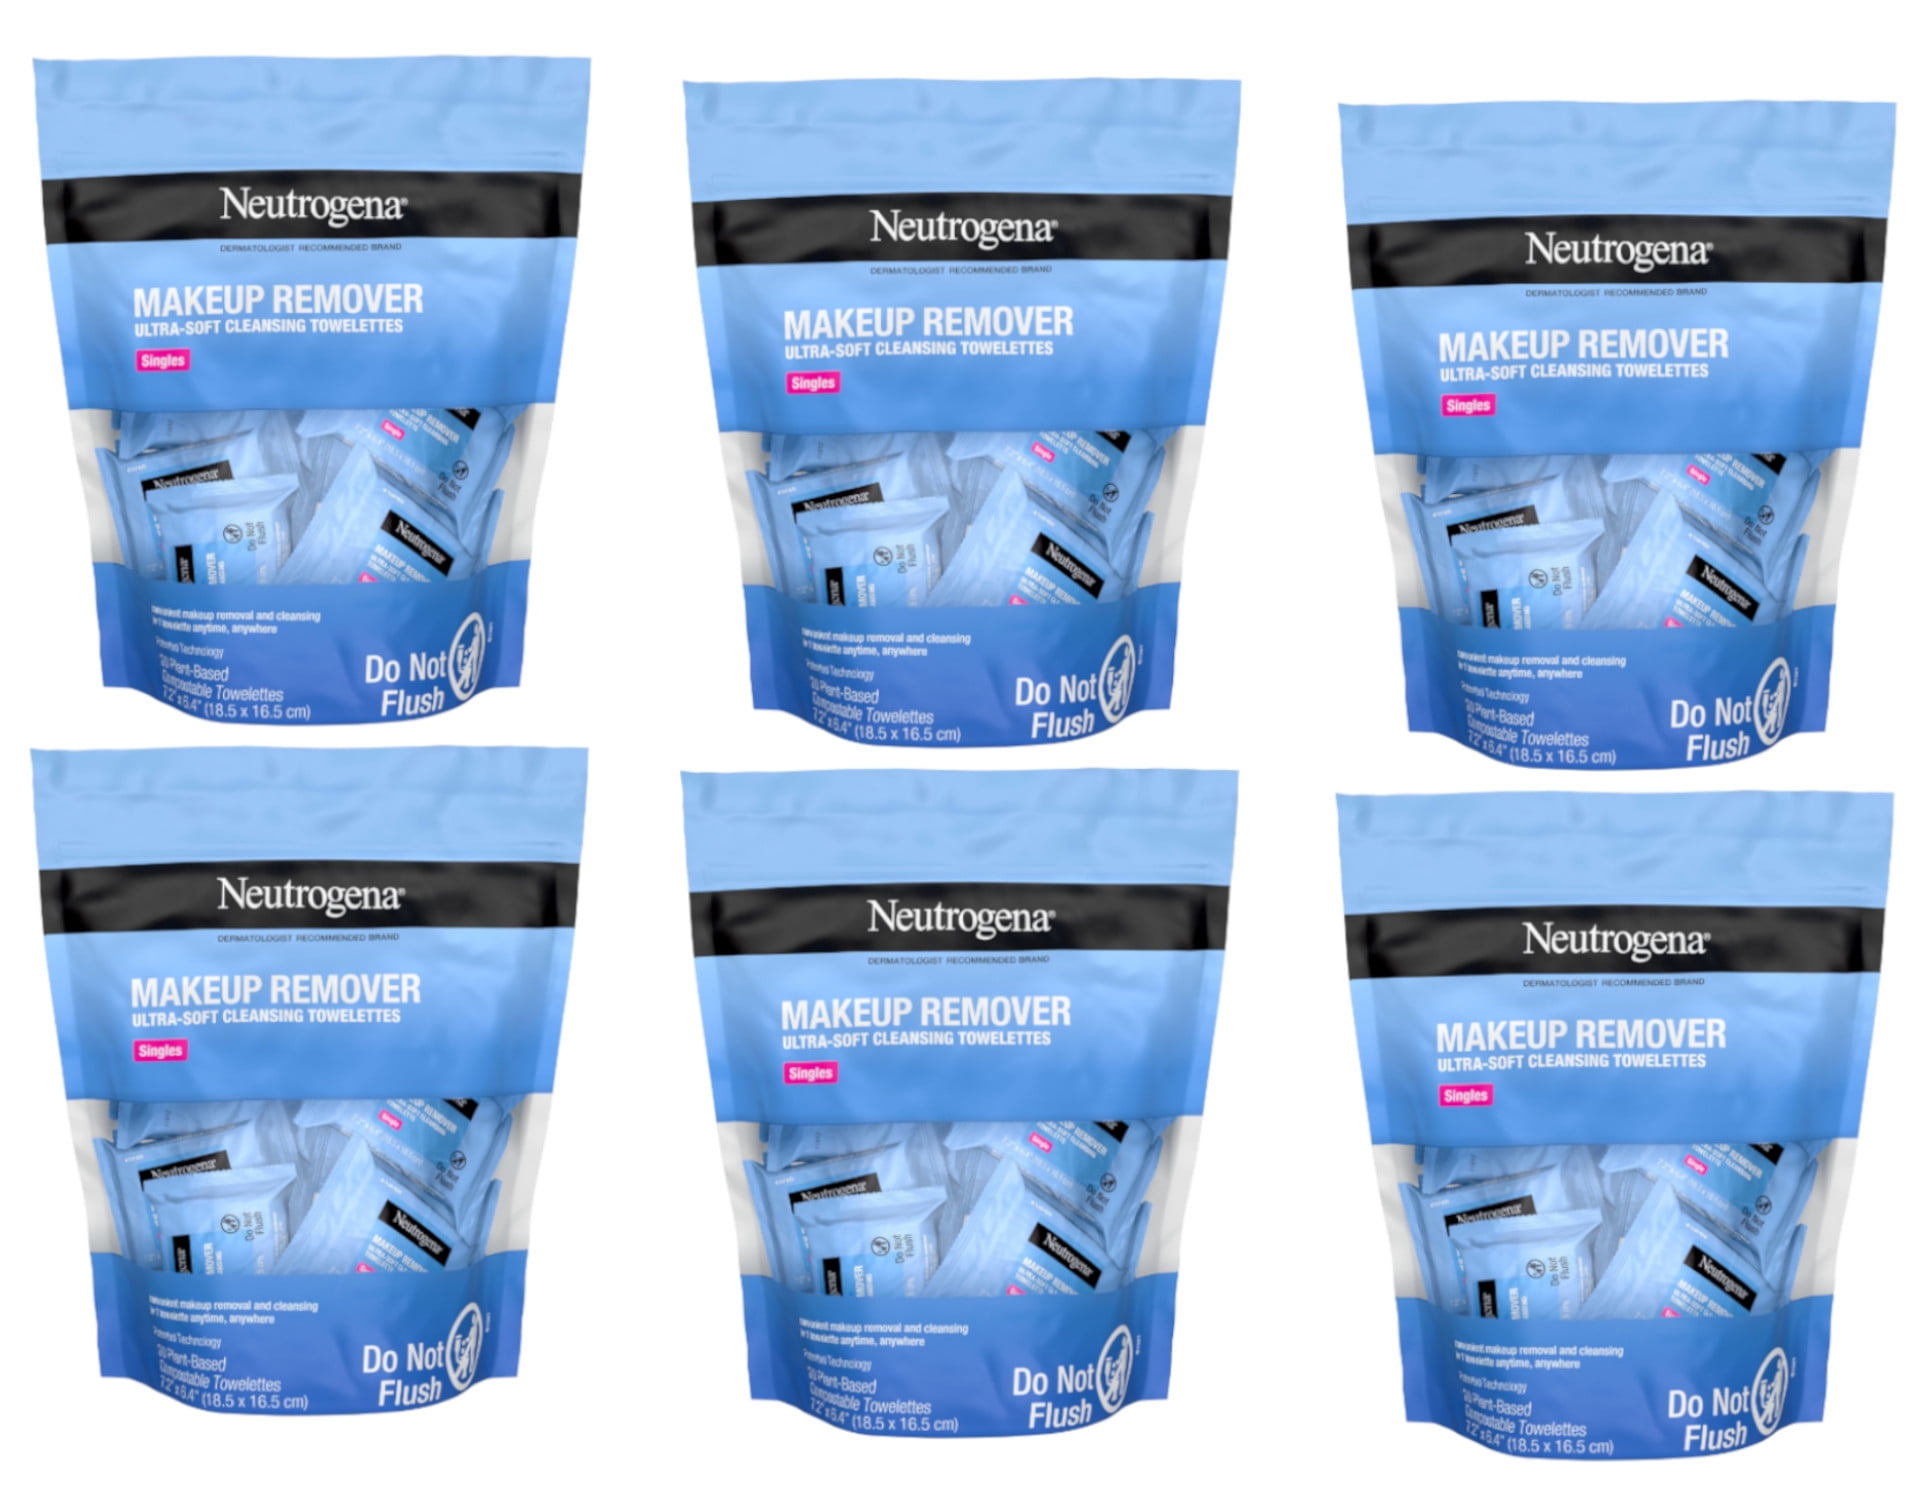 Neutrogena Makeup Remover Cleansing Singles, Face to Remove Dirt, Oil, Makeup & Waterproo (Pack of 6) Walmart.com